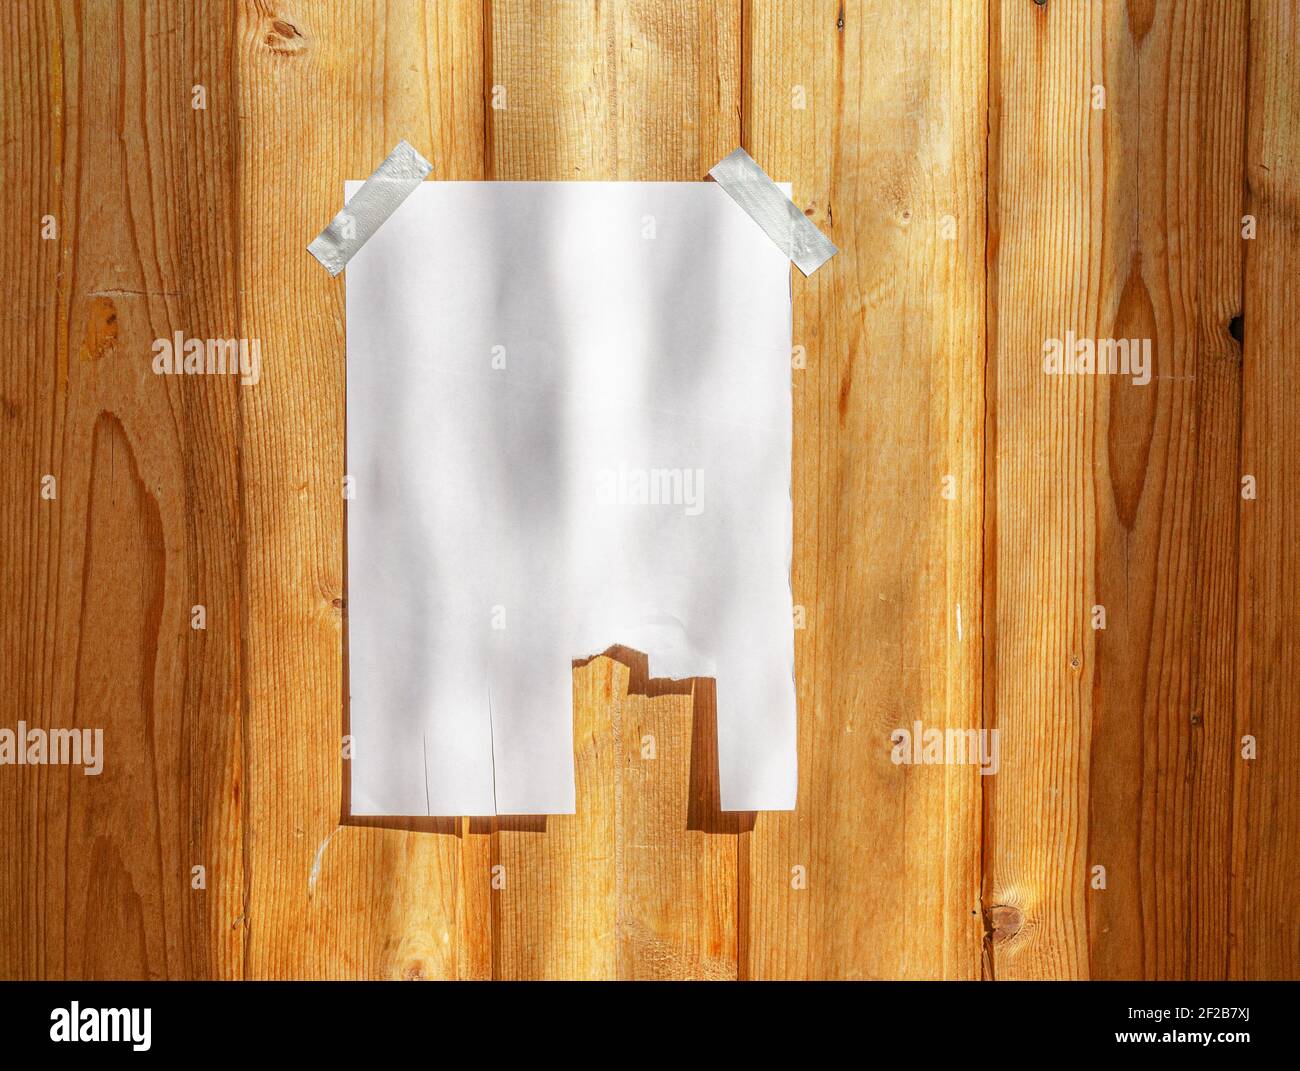 off paper on wood wall. Mock up template. Street paper ad or announcement with tear-off stripes with phone number. Blank mockup Stock Photo - Alamy